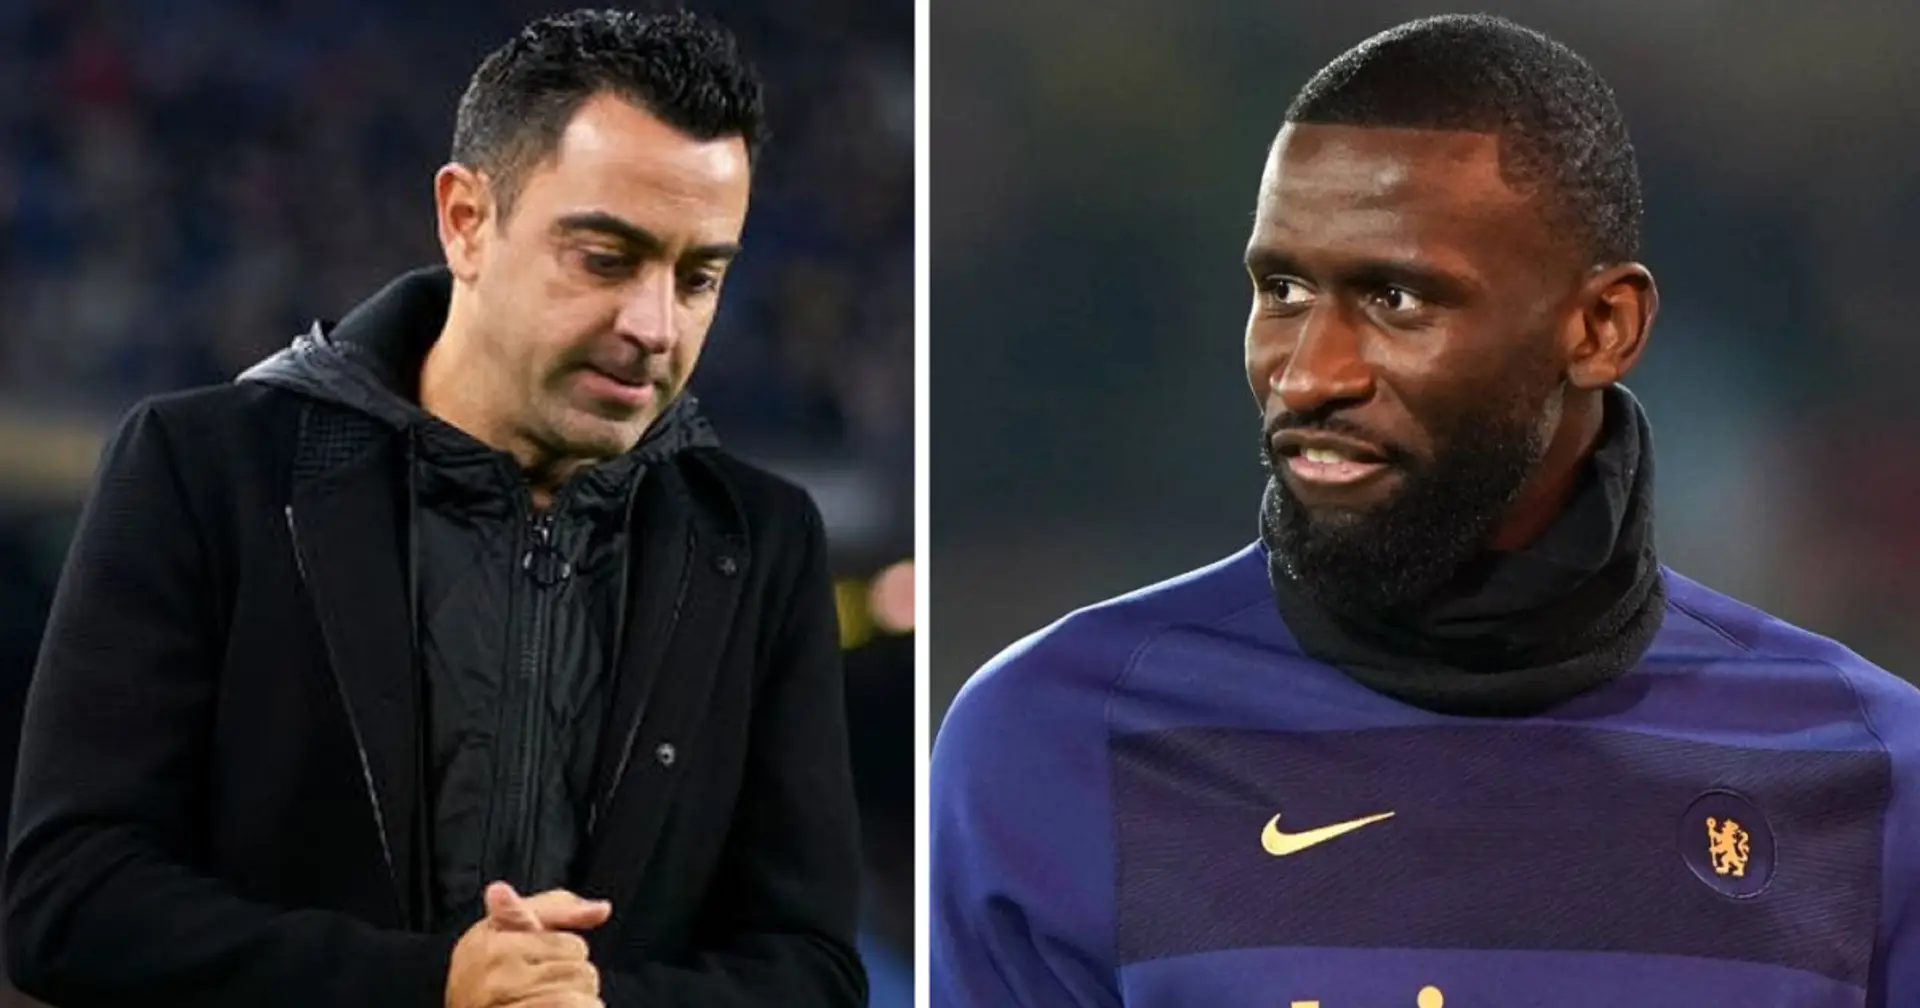 Real Madrid confirms Rudiger signing: who can Barca sign to match them? 3 options